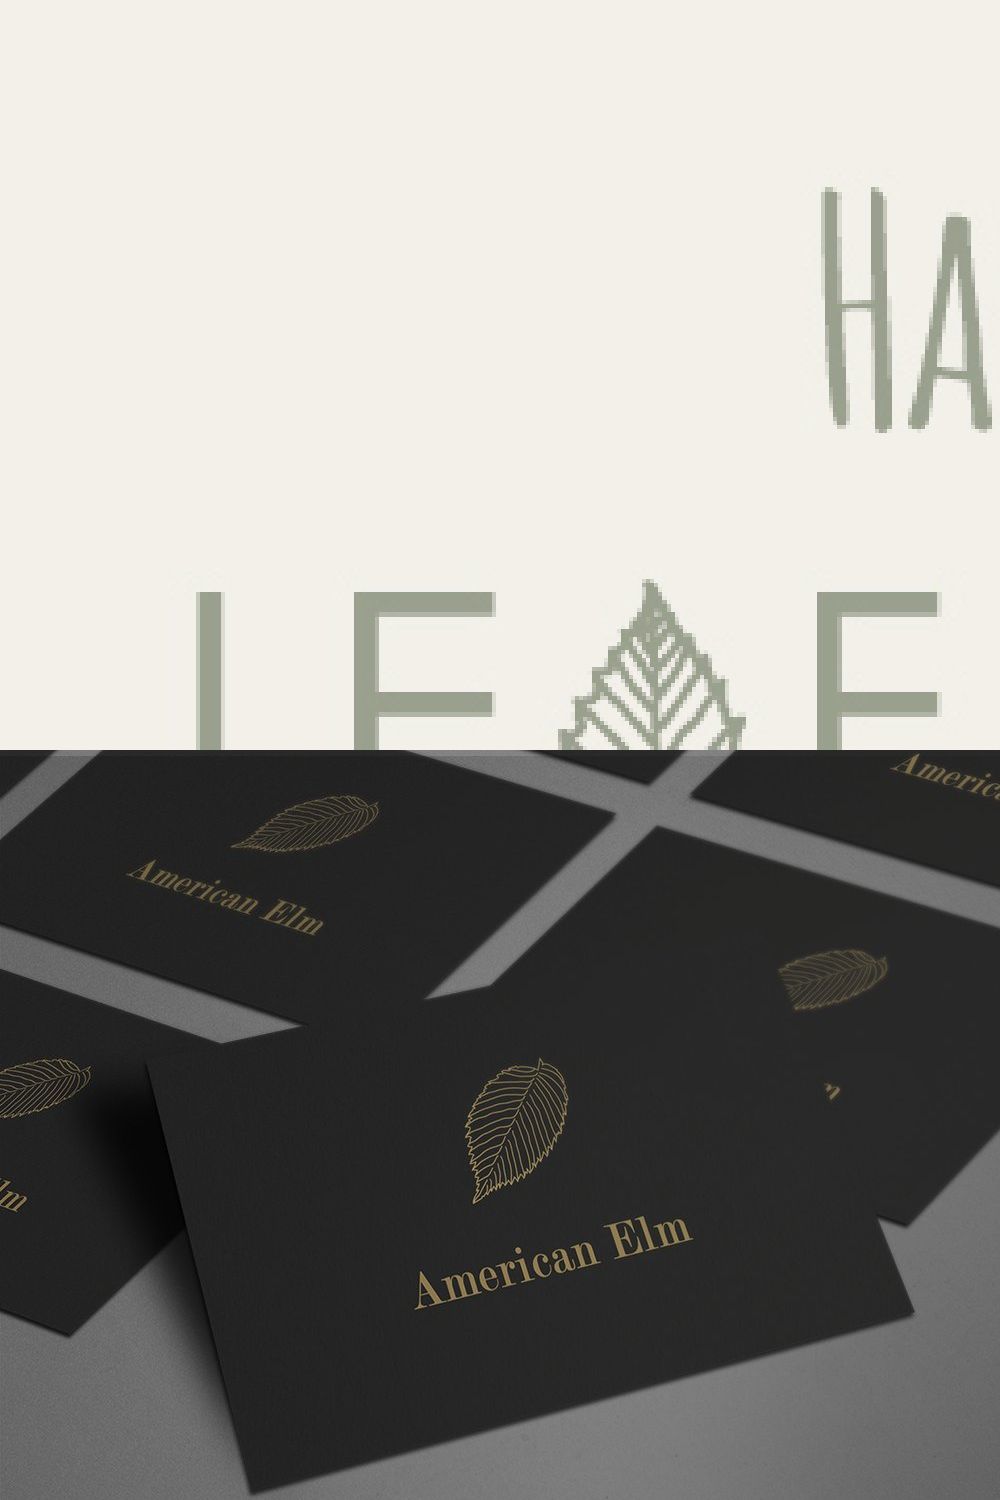 HandDrawn Leaf Library pinterest preview image.